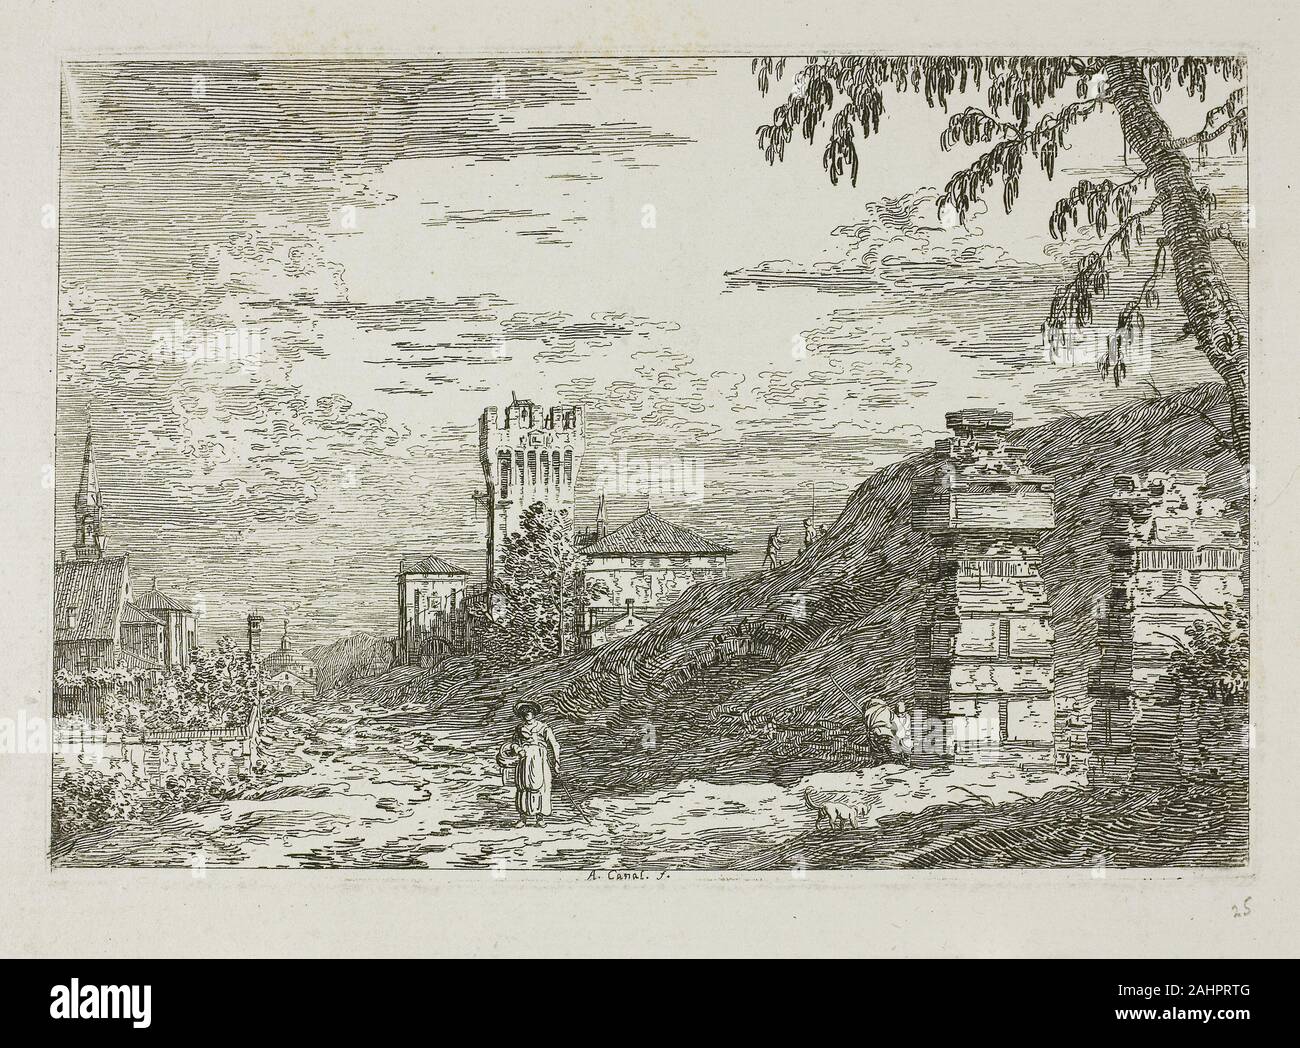 Canaletto. Landscape with Tower and Two Ruined Pillars, from Vedute. 1735–1744. Italy. Etching in black on ivory laid paper Curiously, Canaletto never printed either of these energetic capriccio landscapes (depictions of fantastic architecture or ruins) individually. Instead, they exist only as a pair on a single sheet (for the left half, see 1922.1381.13). While both images include fictional antiquarian architectural elements, it is not known why the artist combined them. Perhaps it was their mirrored compositions when placed side by side, both images slope inward toward a church that straddl Stock Photo